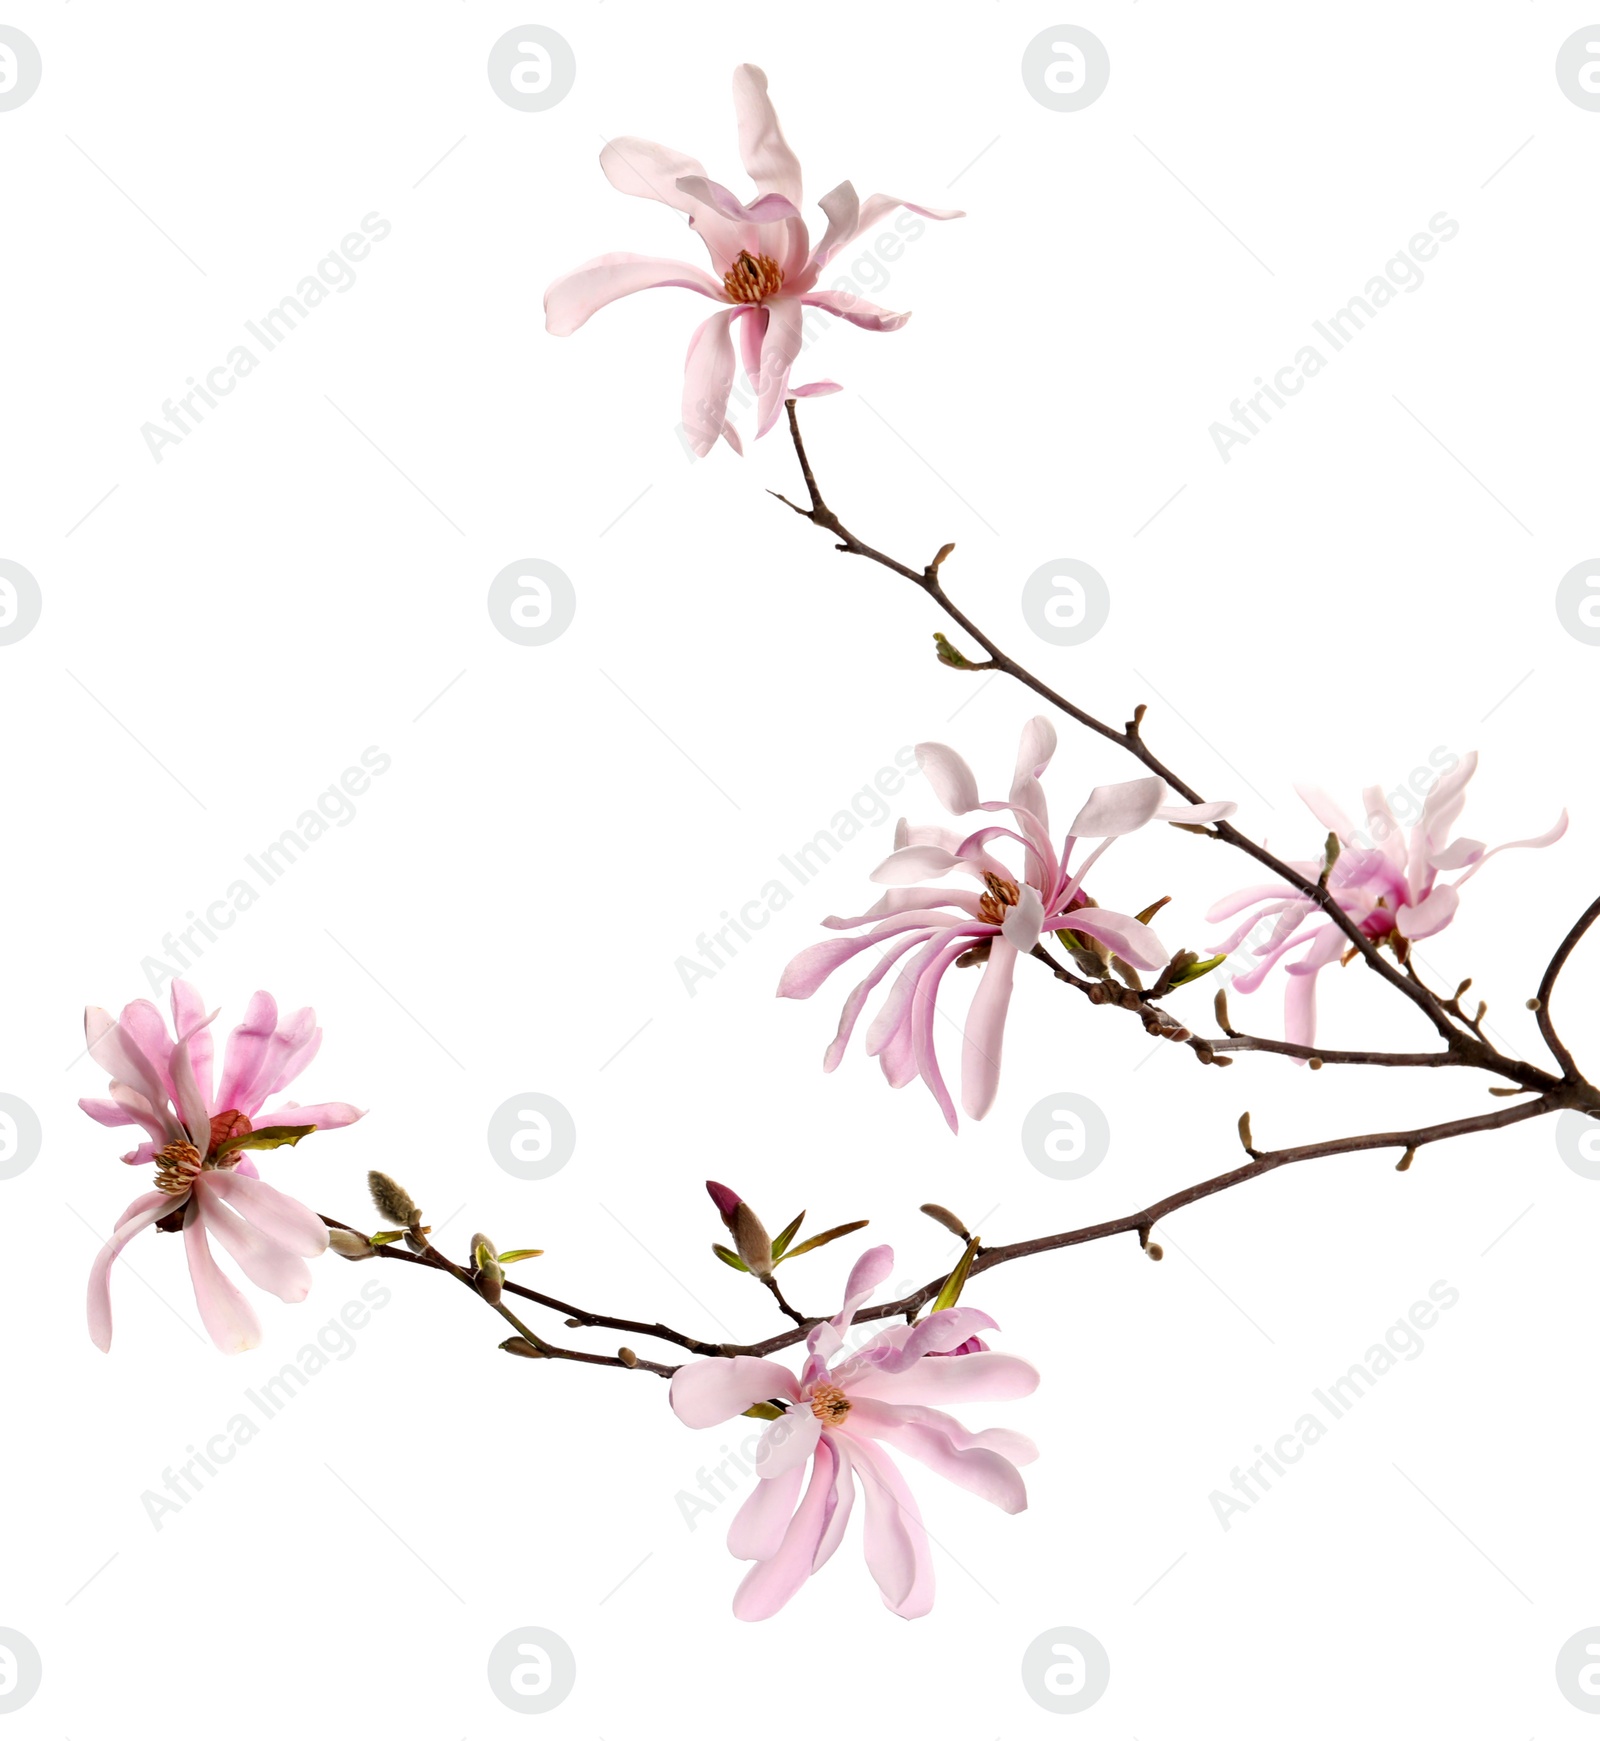 Photo of Magnolia tree branch with beautiful flowers isolated on white